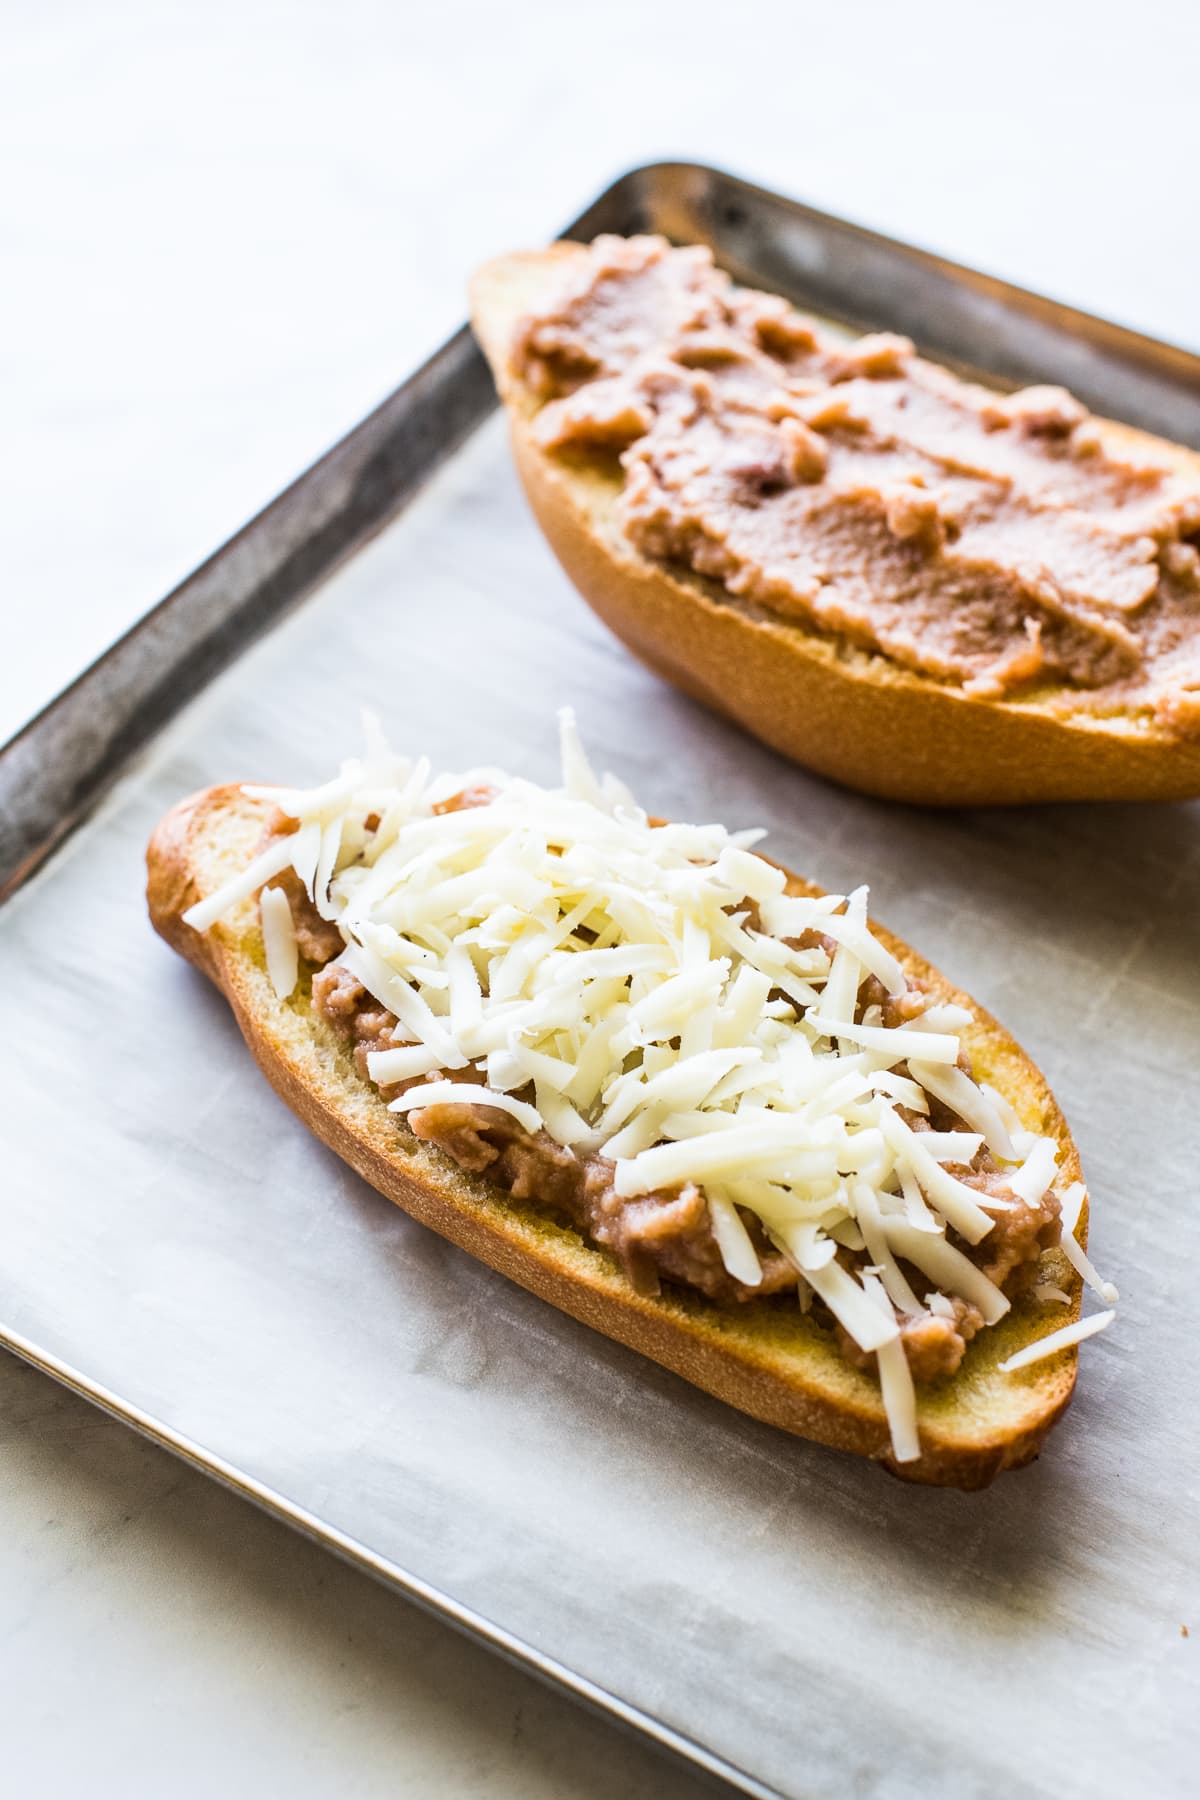 Toasted bolillo bread topped with refried beans and shredded cheese.